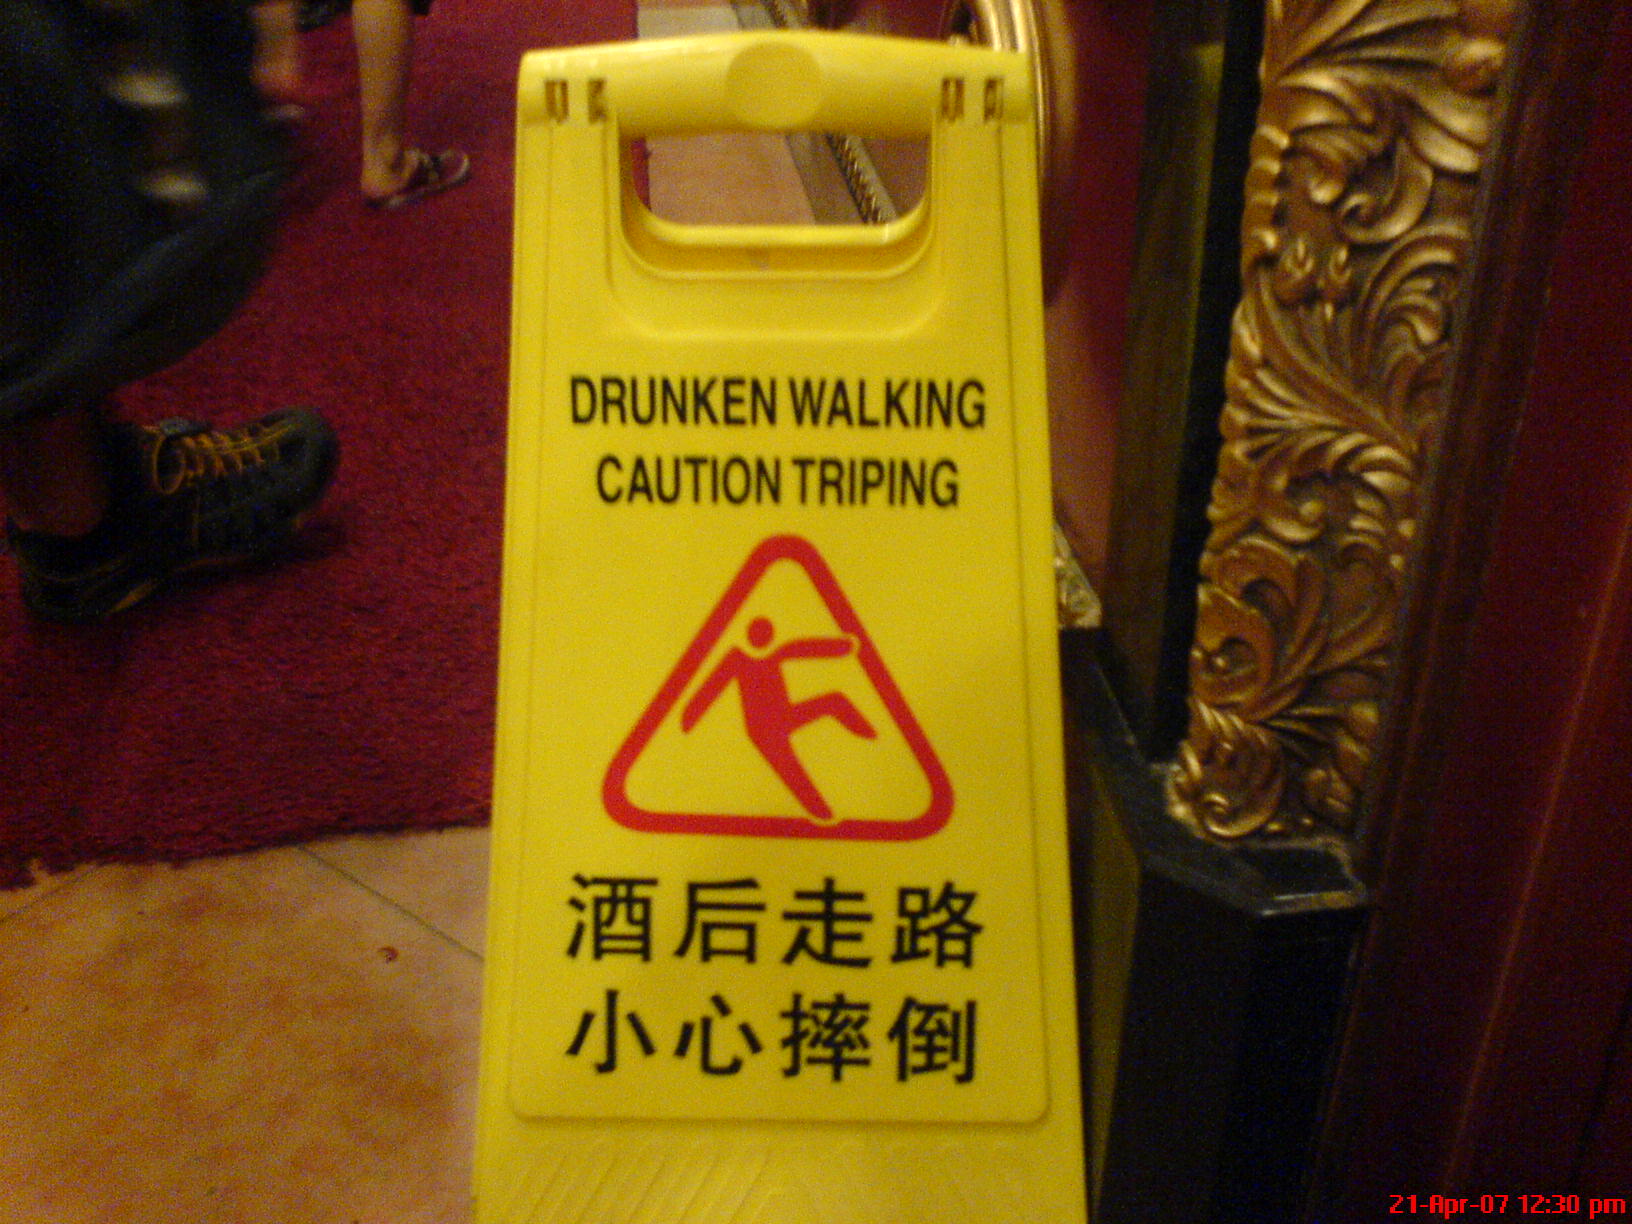 taken in Hangzhou China, This is a Genuine photo. Photo copywright satireandcomment.com. You may reuse  as long as you credit to www.satireandcomment.com